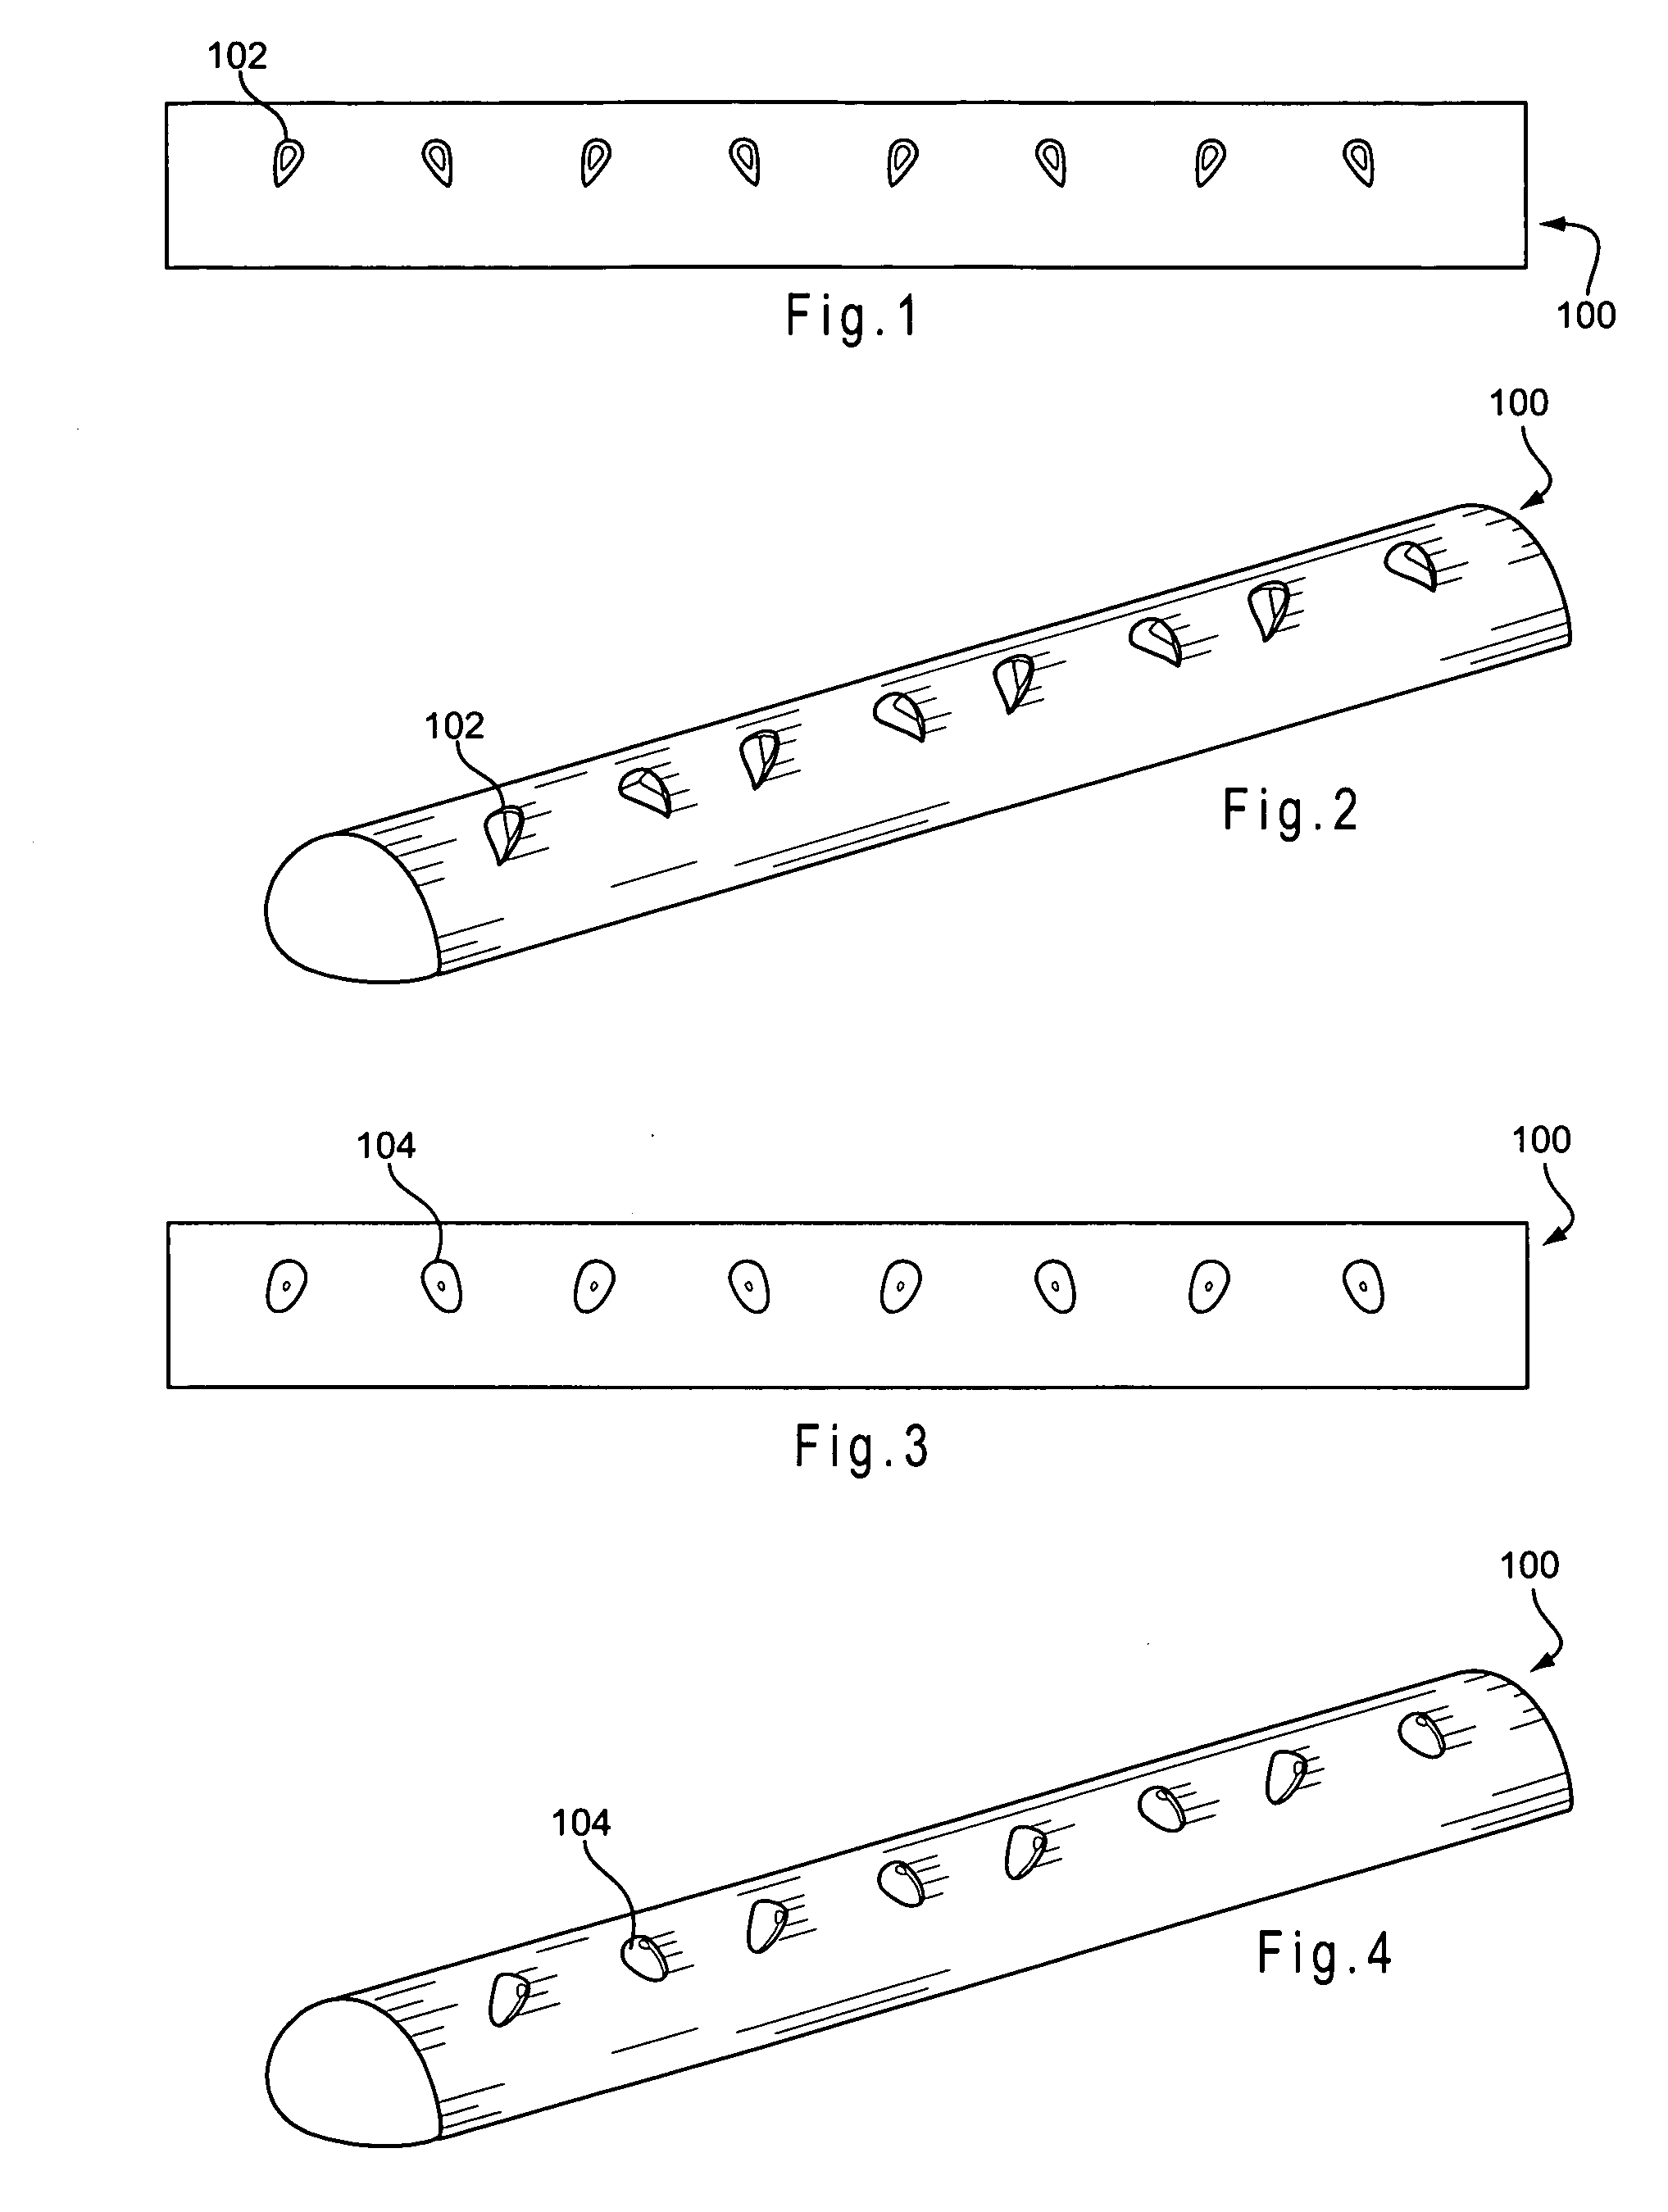 Wake generating solid elements for joule heating or infrared heating